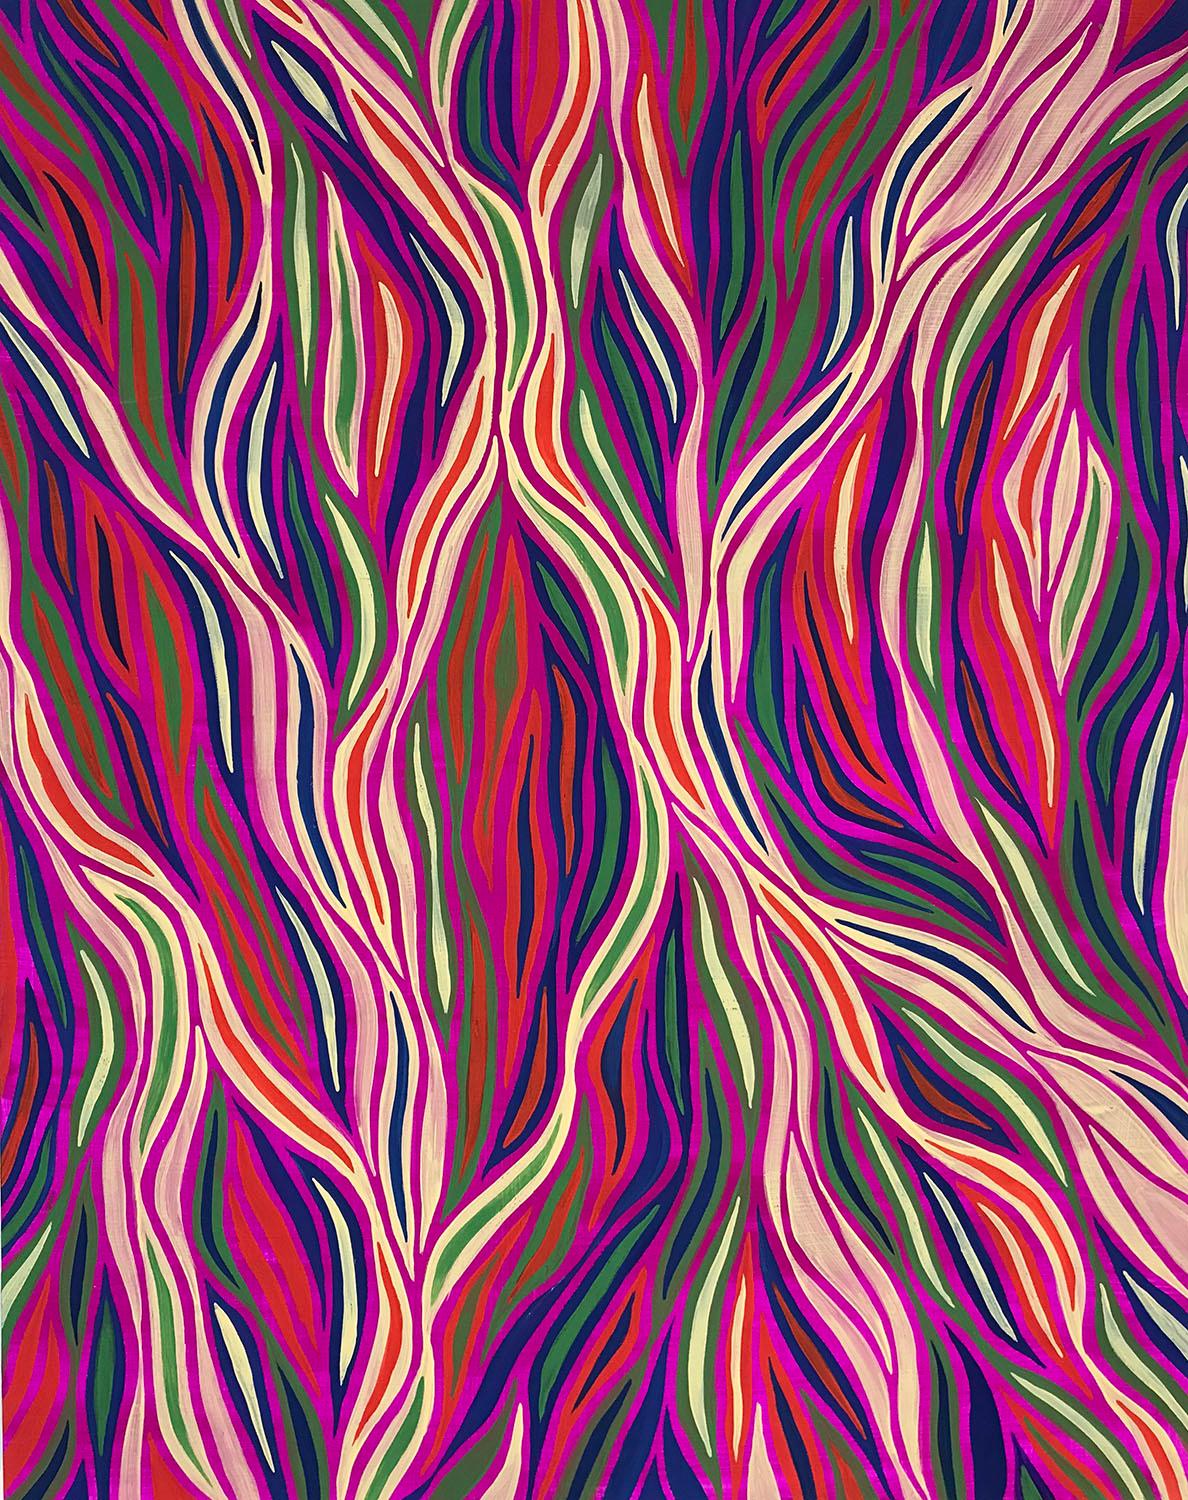 This vivid bright pink optical abstraction have wavy lines that undulate on the surface. 

Artist Statement:
I have a deep and abiding interest in process-driven work, from mandalas and yantras to Aboriginal song-line paintings, Islamic tiles, and